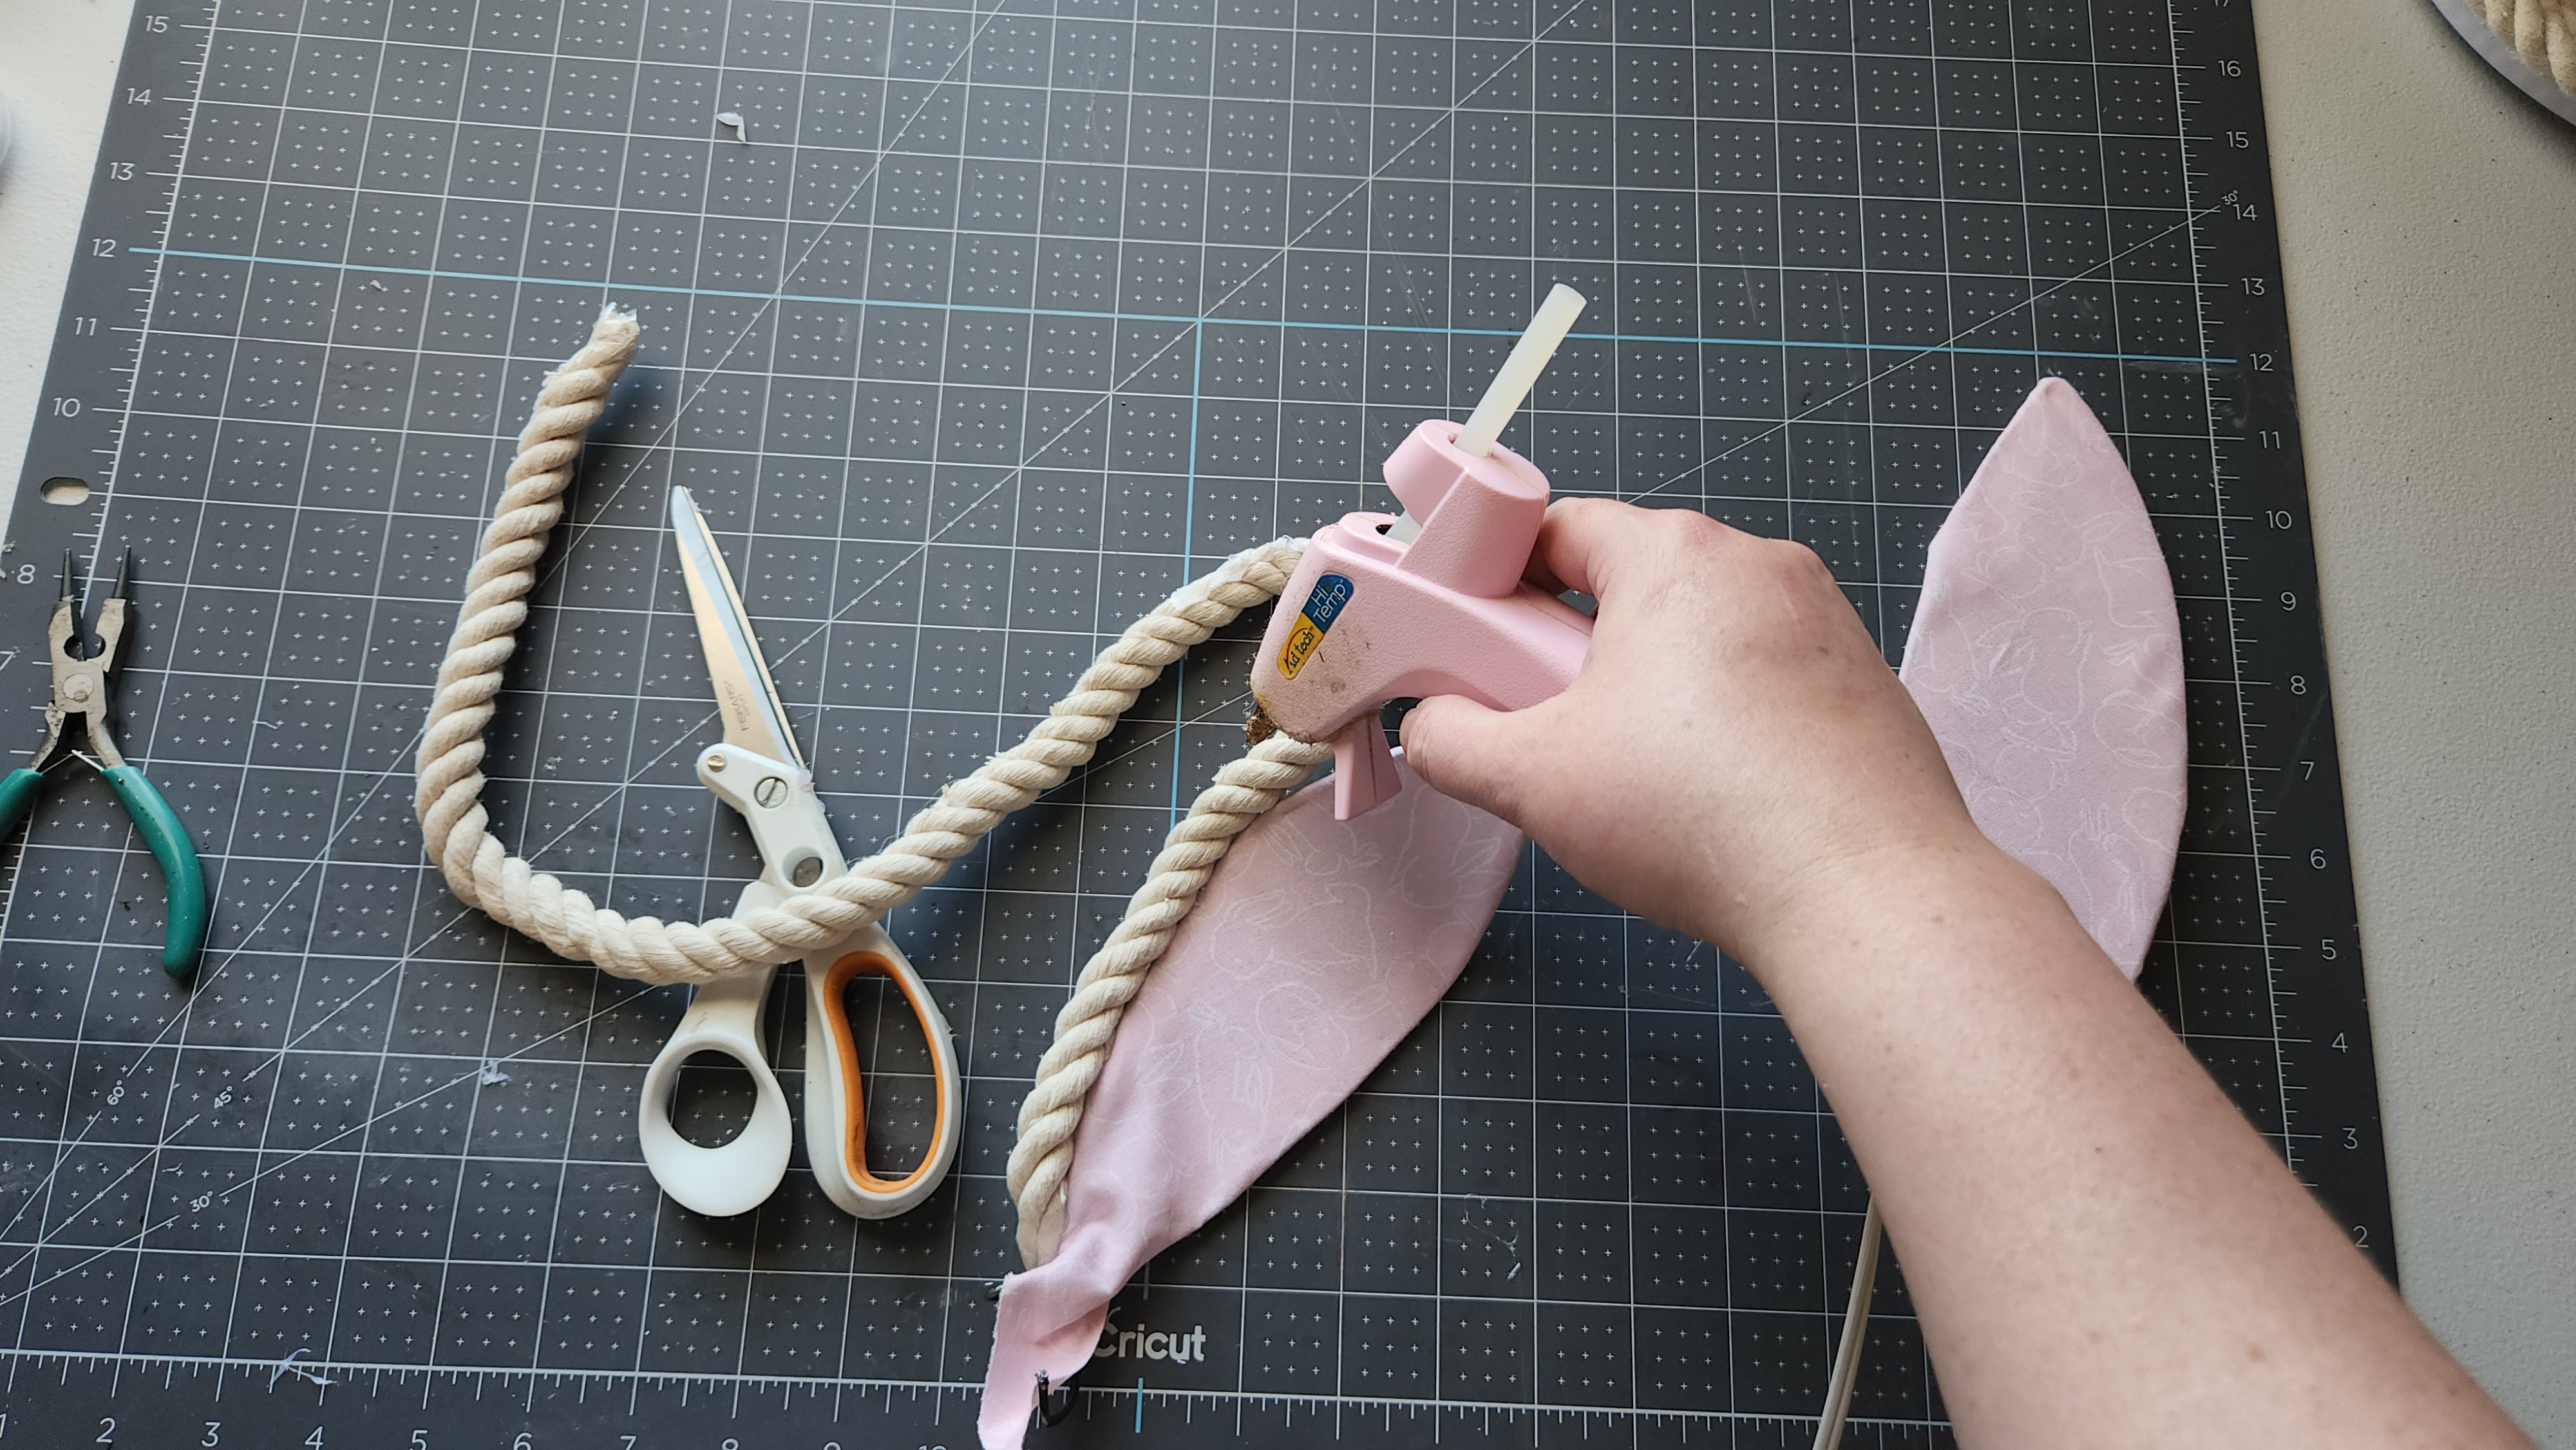 Gluing cotton rope around the edge of the fabric covered bunny ear.